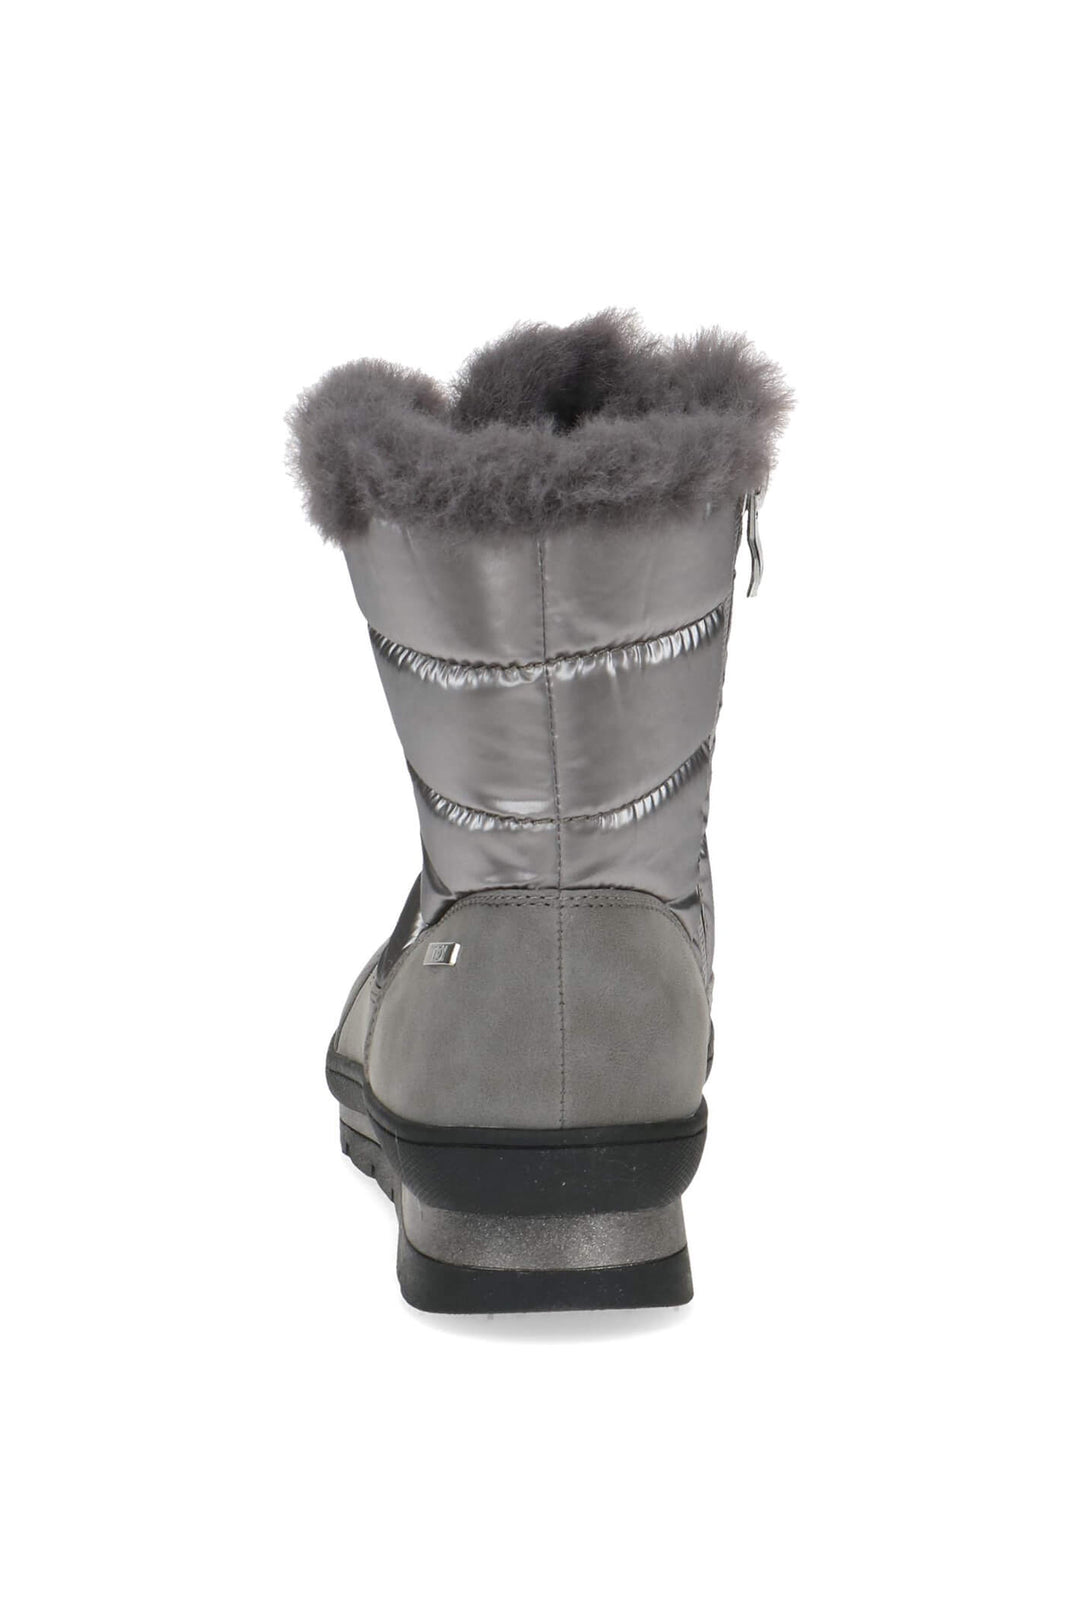 Caprice Holy 26226 Taupe Faux Fur Trimmed Waterproof Snow Boots - Experience Boutique